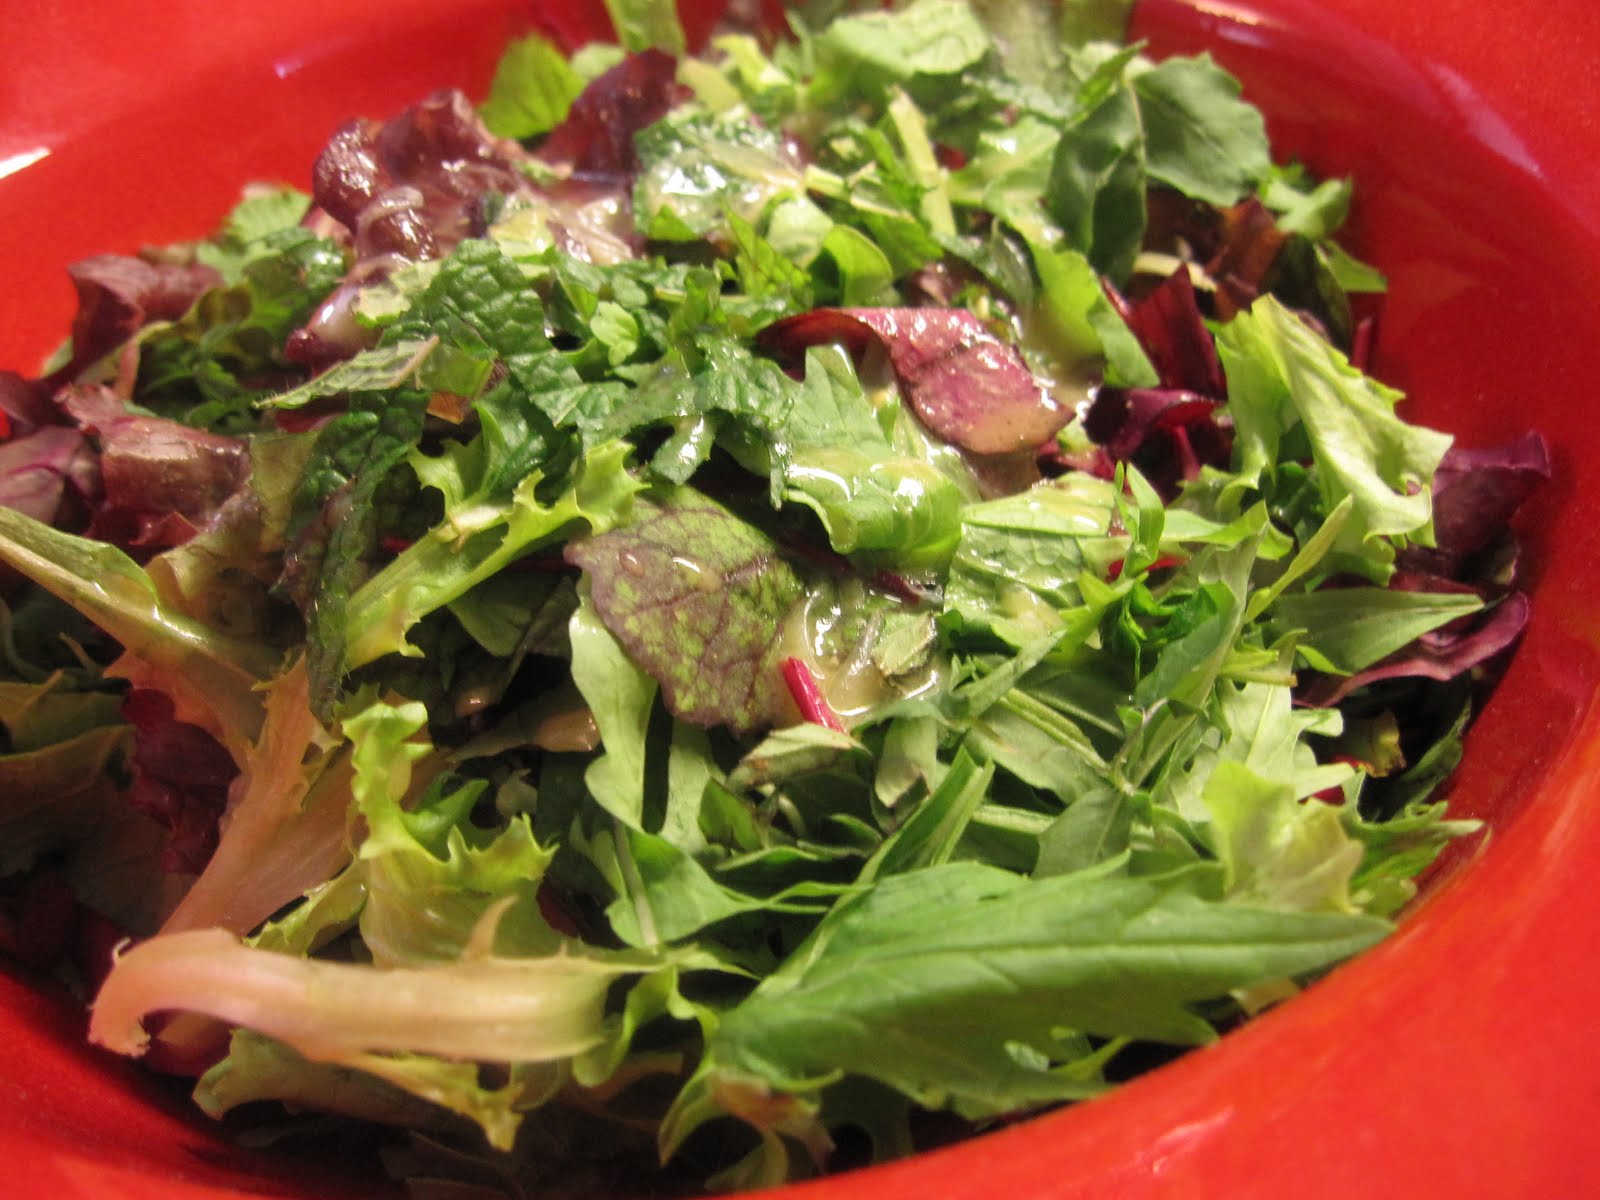 Recipes From 4everykitchen Mixed Greens With Honey Caper Vinaigrette